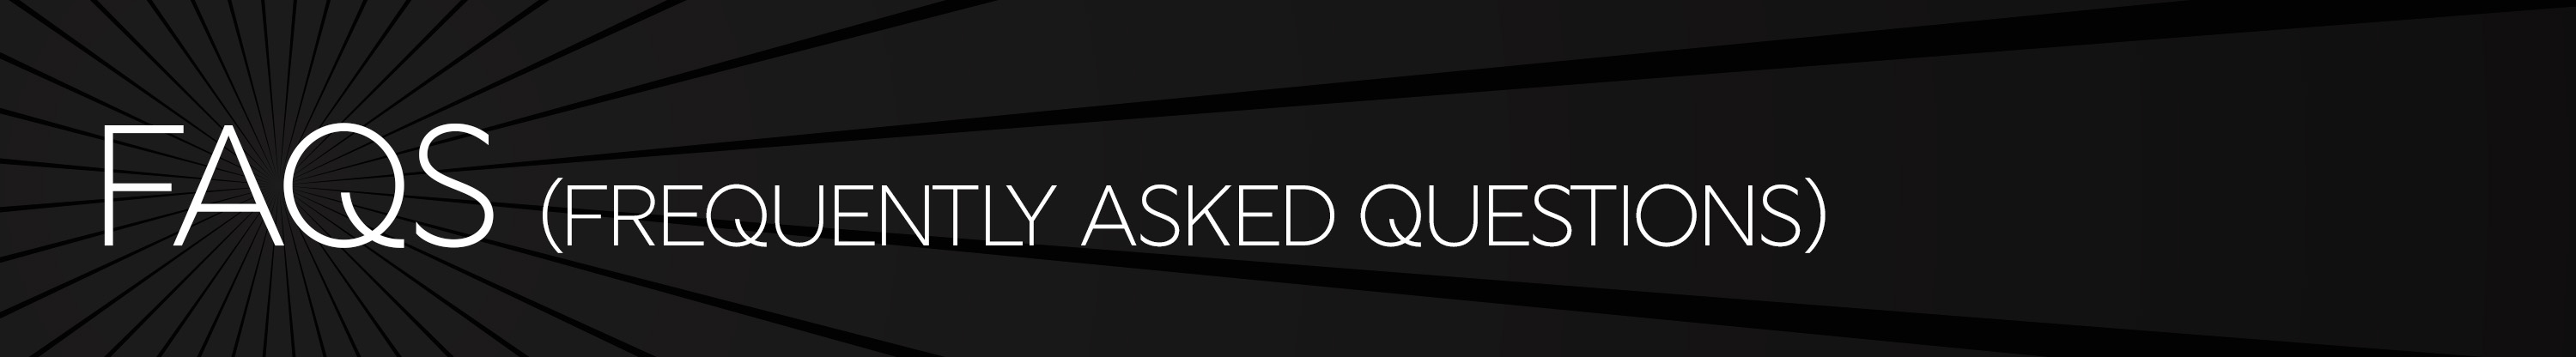 Frequently Asked Questions Banner